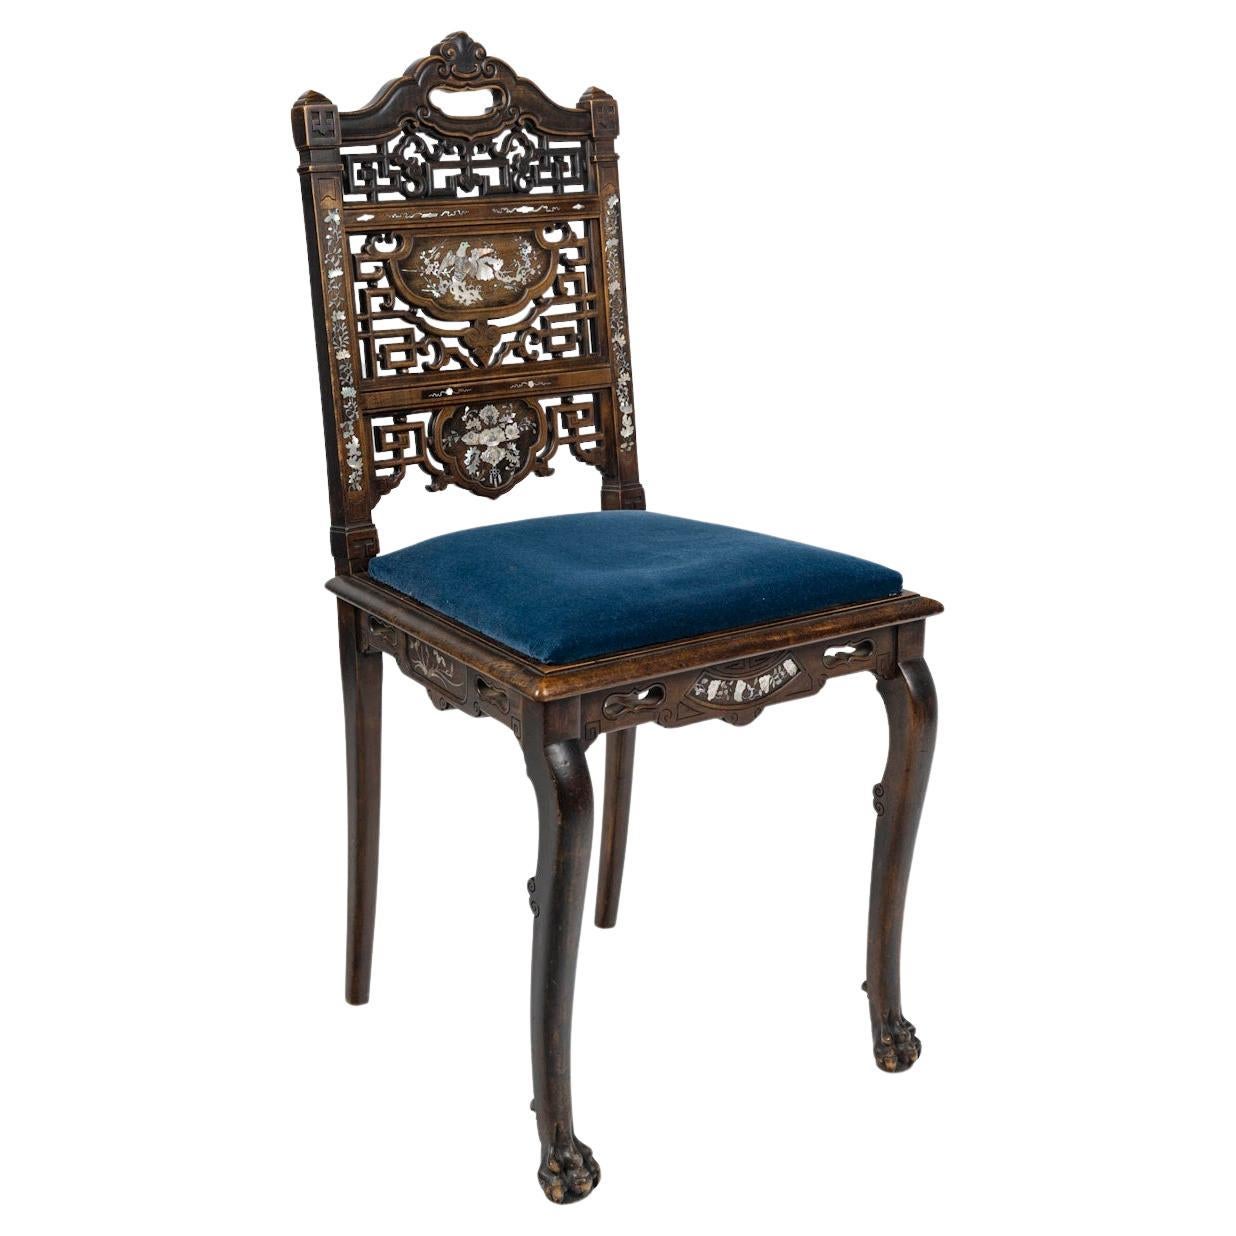 Chair by Gabriel Viardot, in the Asian Art Style, 19th Century.